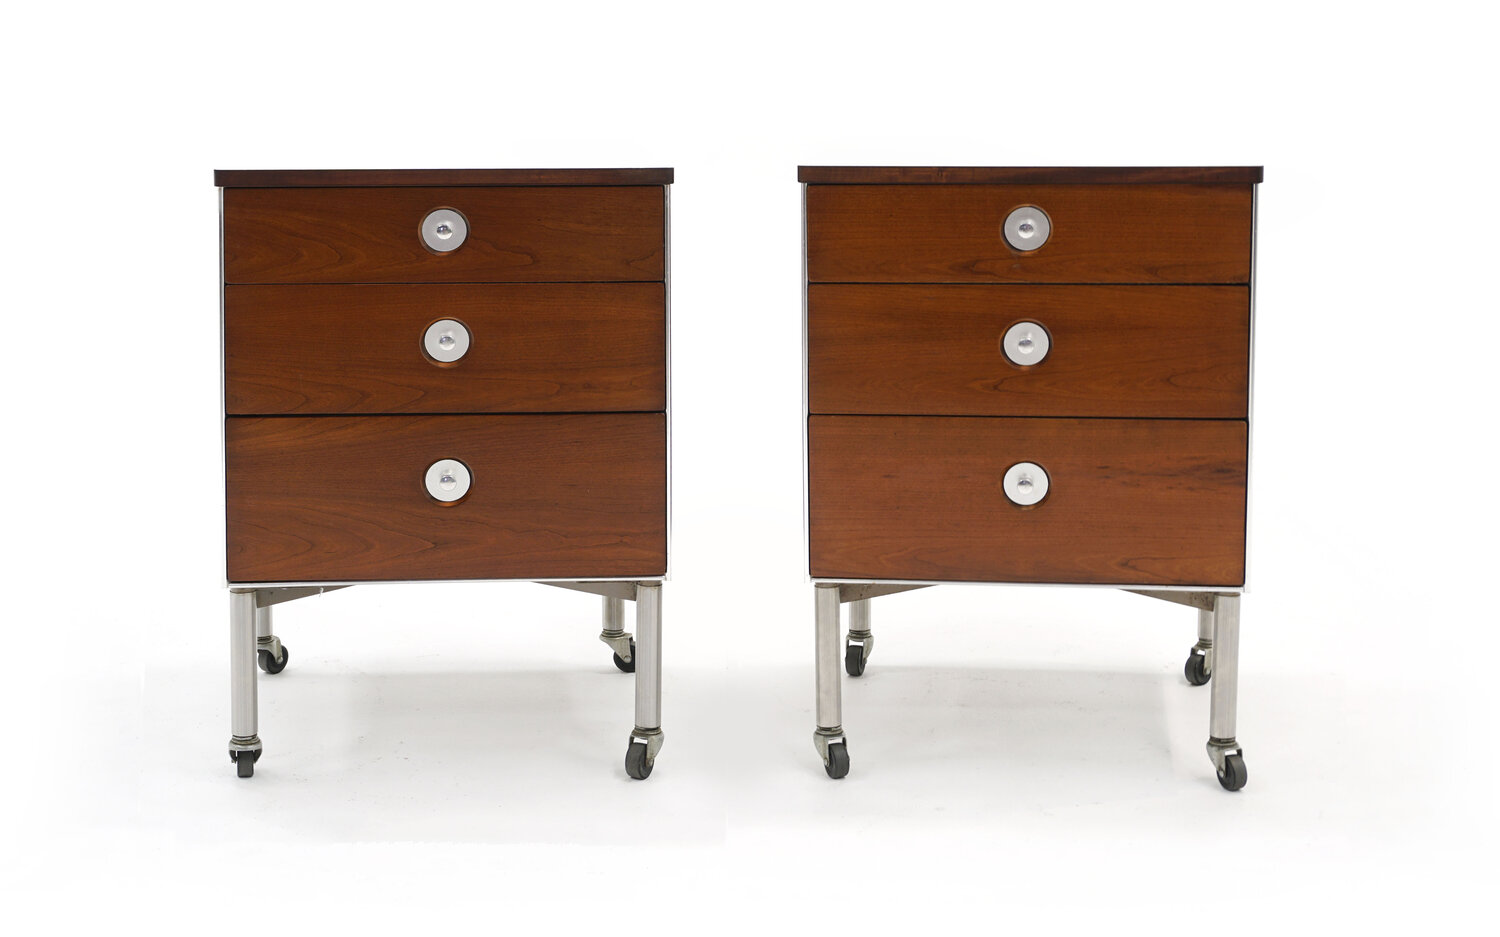 Arbejdskraft oxiderer bryllup Pair Nightstands by Raymond Loewy for Hill Rom, Walnut, off White Laminate  Tops — RETRO INFERNO